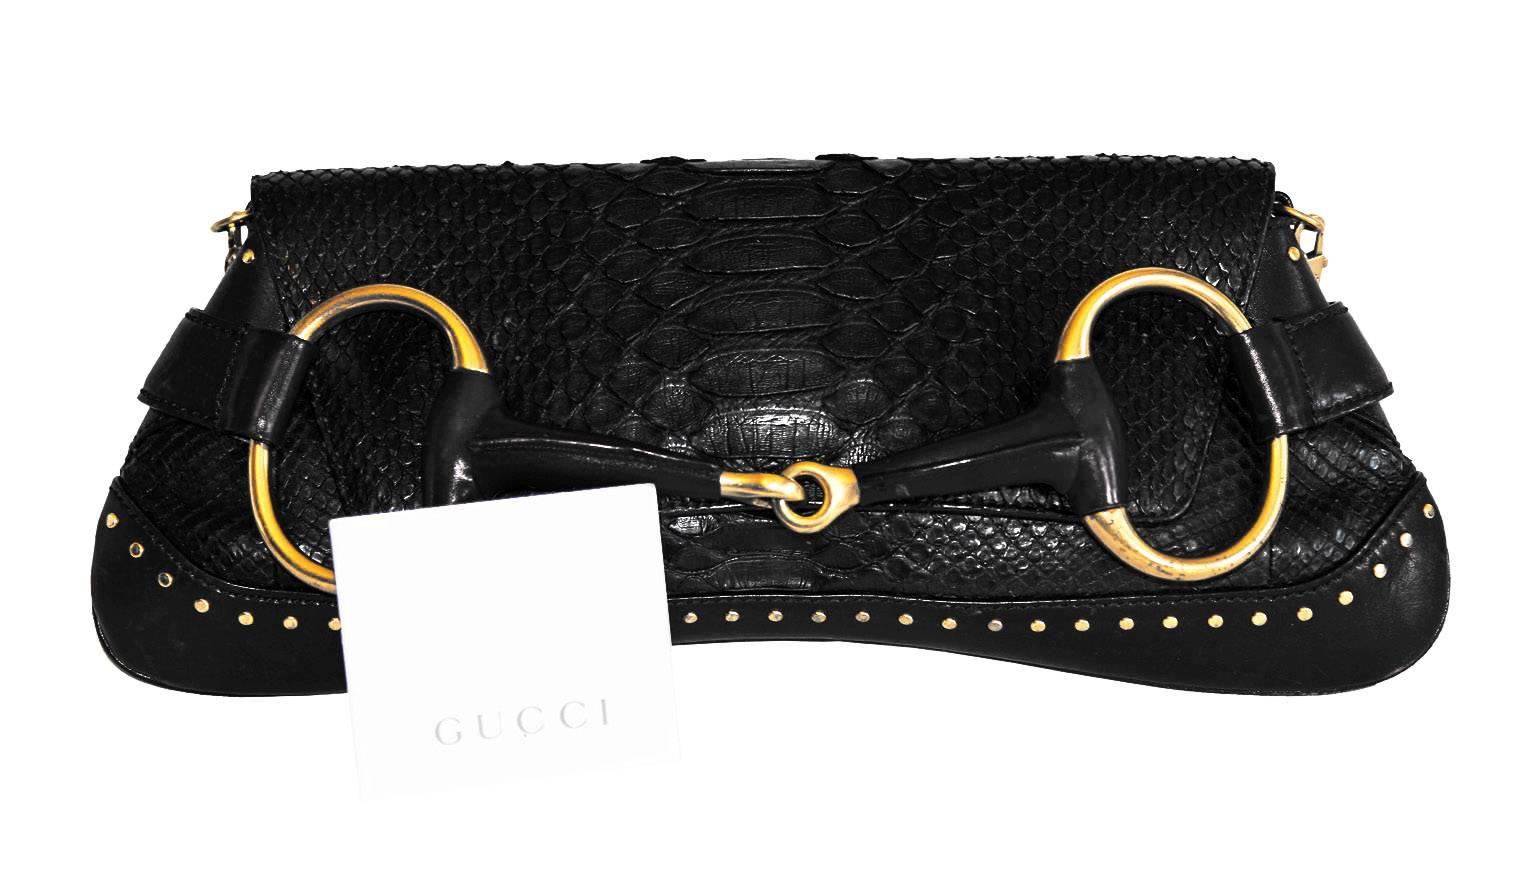 That Incredible Black Python Leather Horsebit Bag From Tom Ford's Gucci Spring Summer 2002 Collection!

This amazing bag has only been used a handful of times & is in very good condition with only minimal signs of wear throughout... an